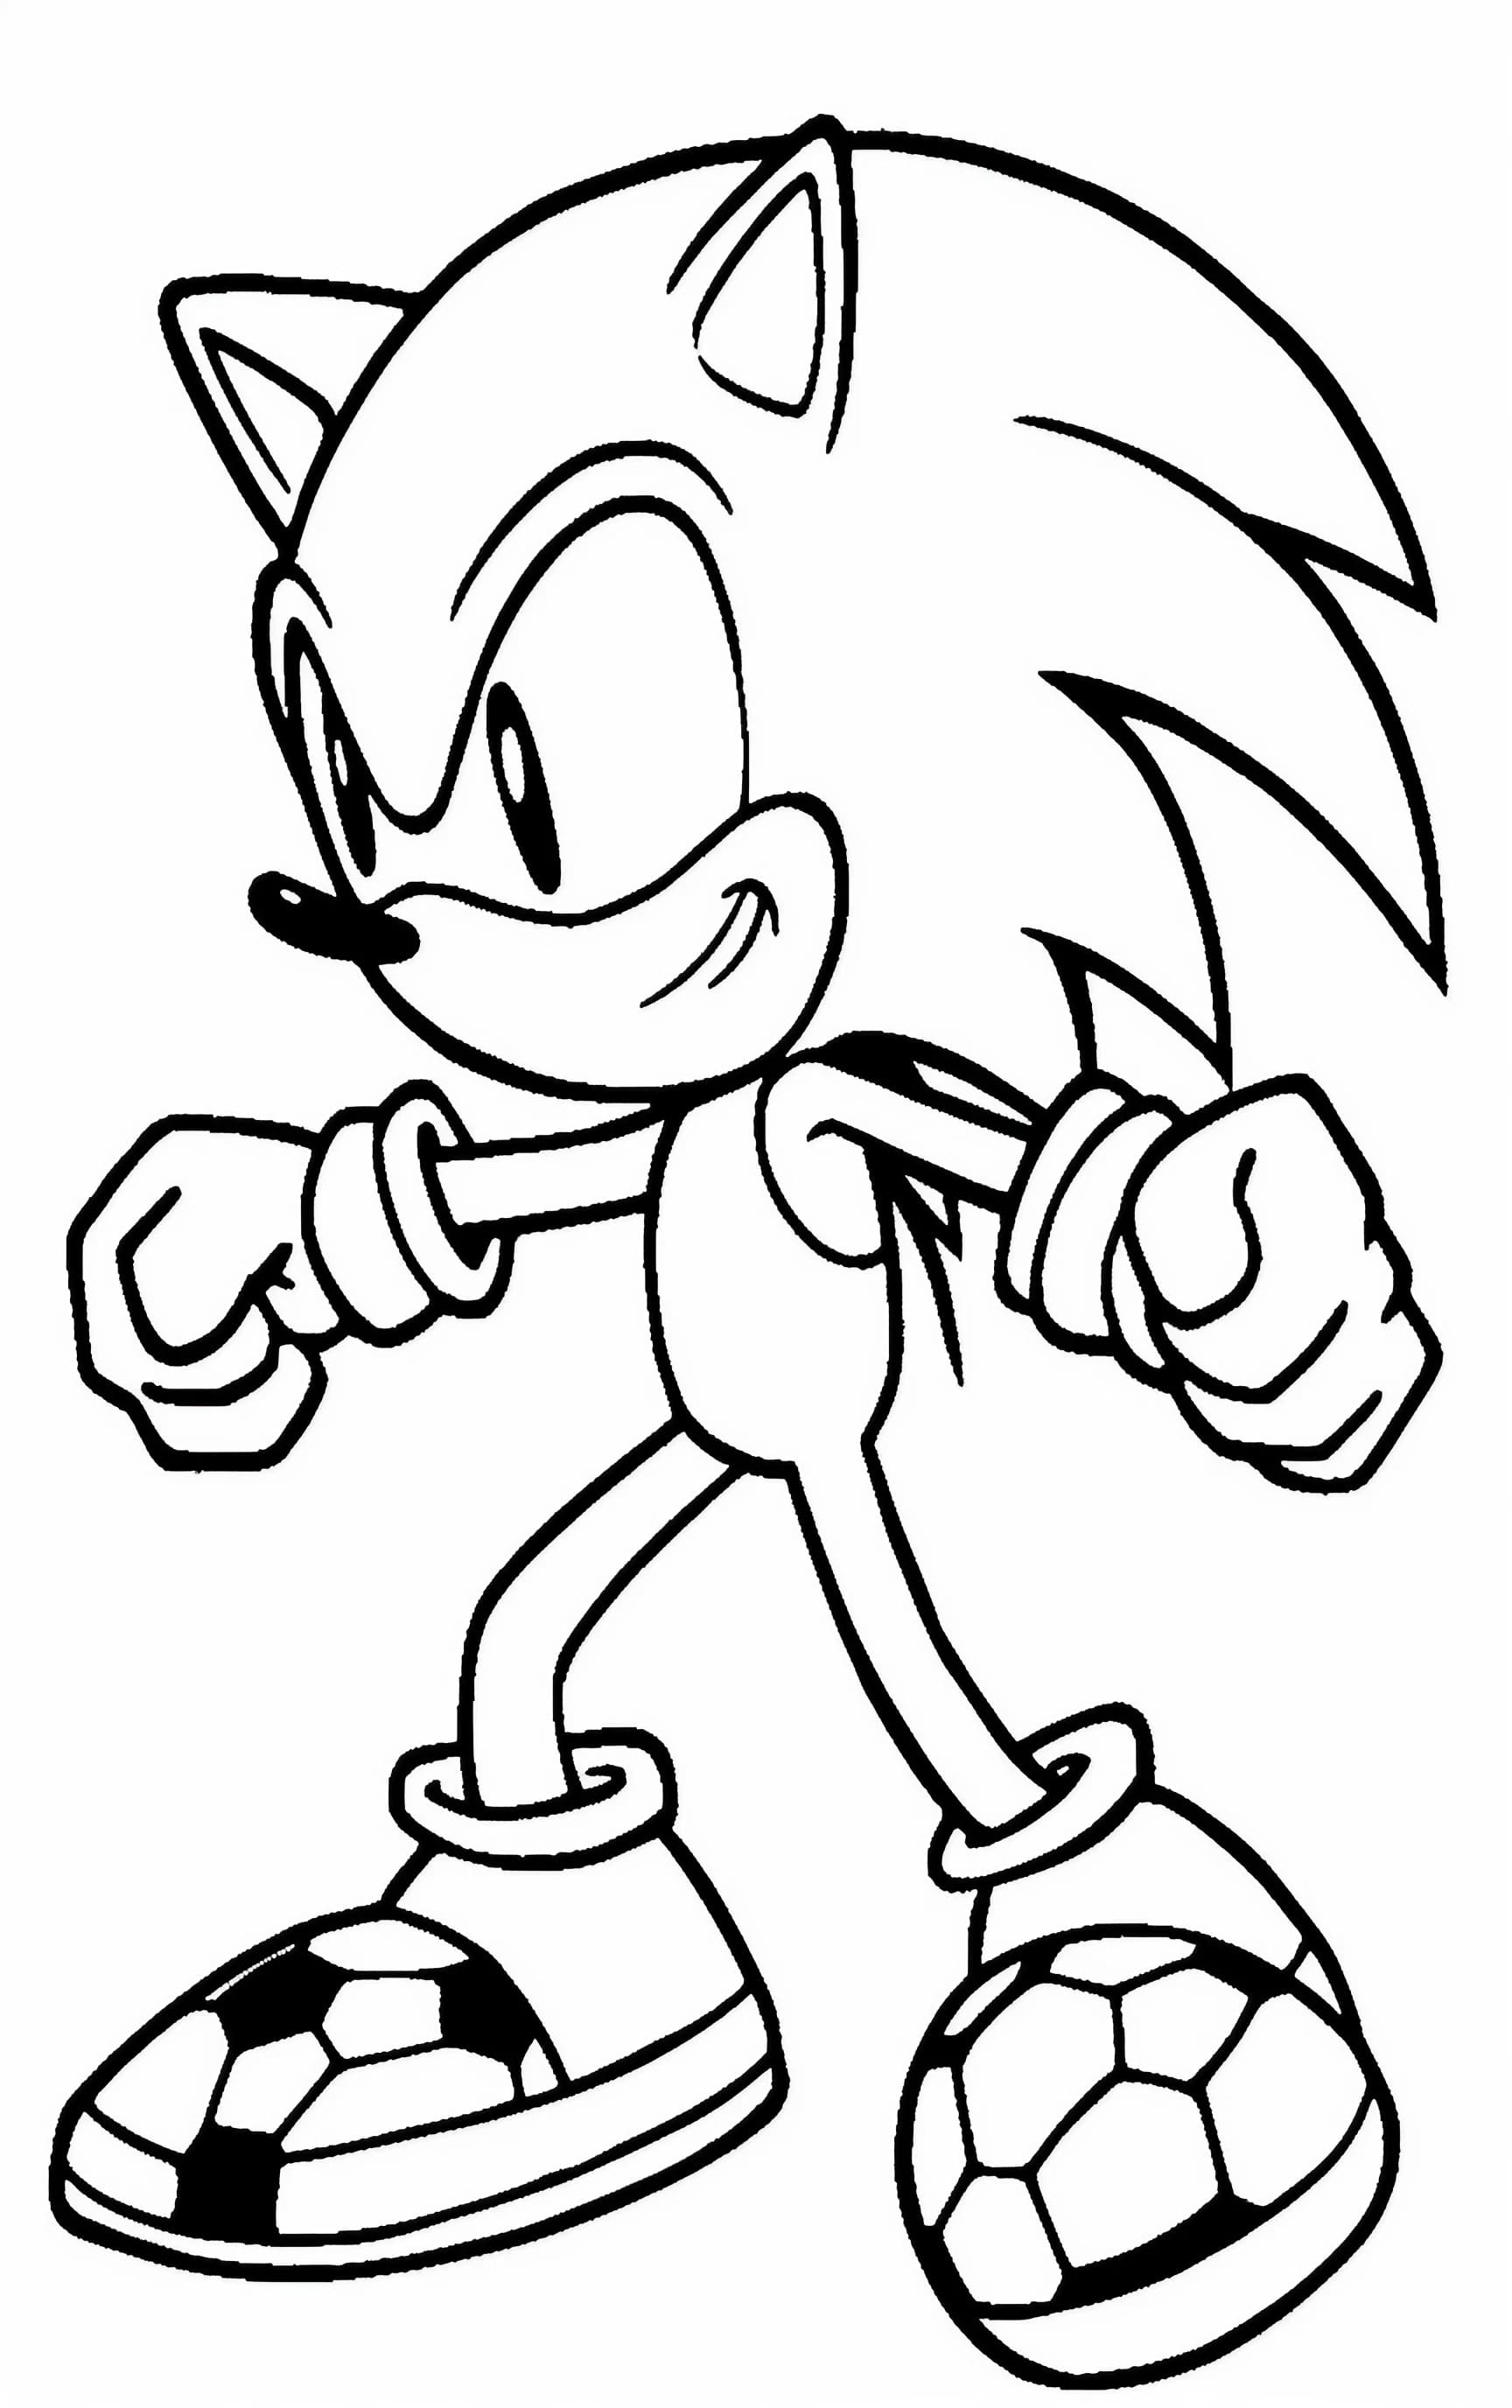 Sonic coloring pages for free and printable